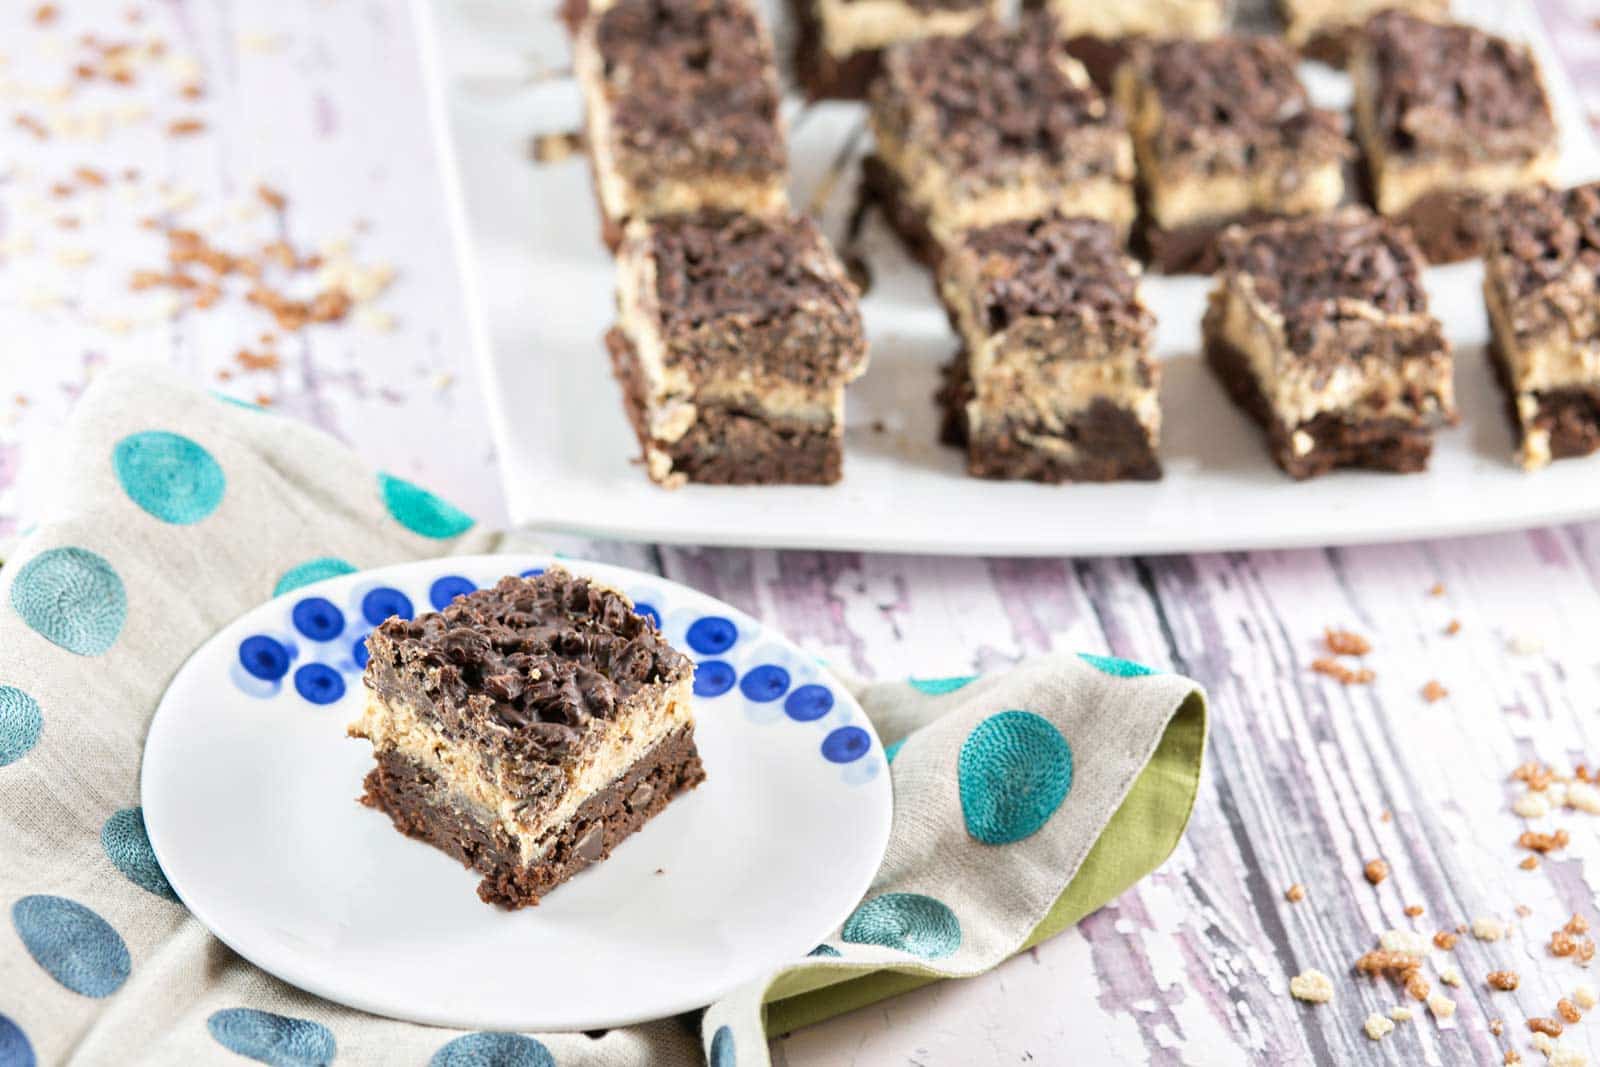 Peanut Butter Crunch Brownies: homemade brownies, peanut butter ganache frosting, and a Rice Krispie chocolate crunch layer - the perfect make-ahead party treat! {Bunsen Burner Bakery}